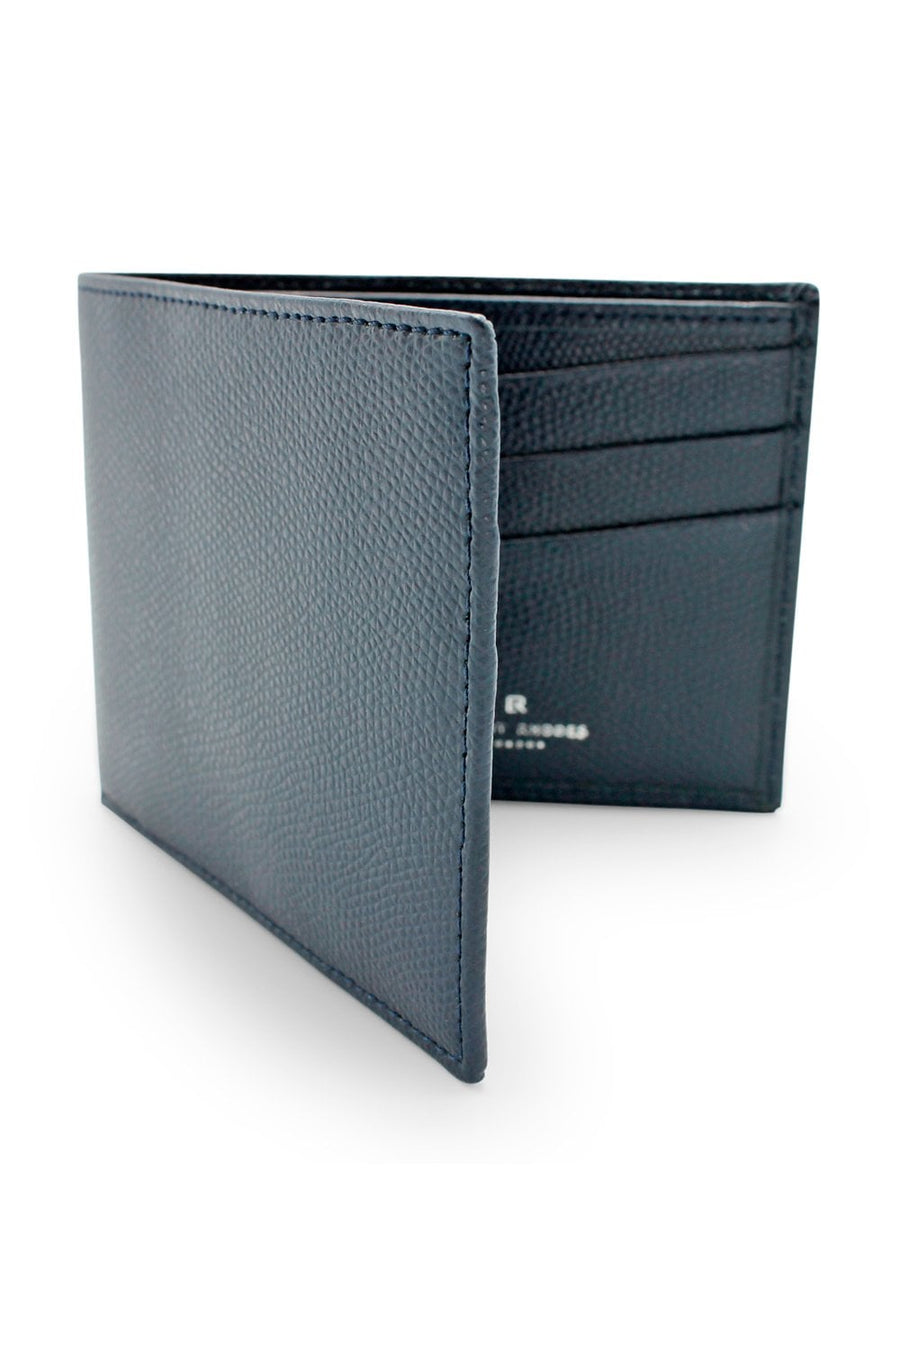 Buy the Elliot Rhodes Dauphin Wallet in Navy at Intro. Spend £50 for free UK delivery. Official stockists. We ship worldwide.